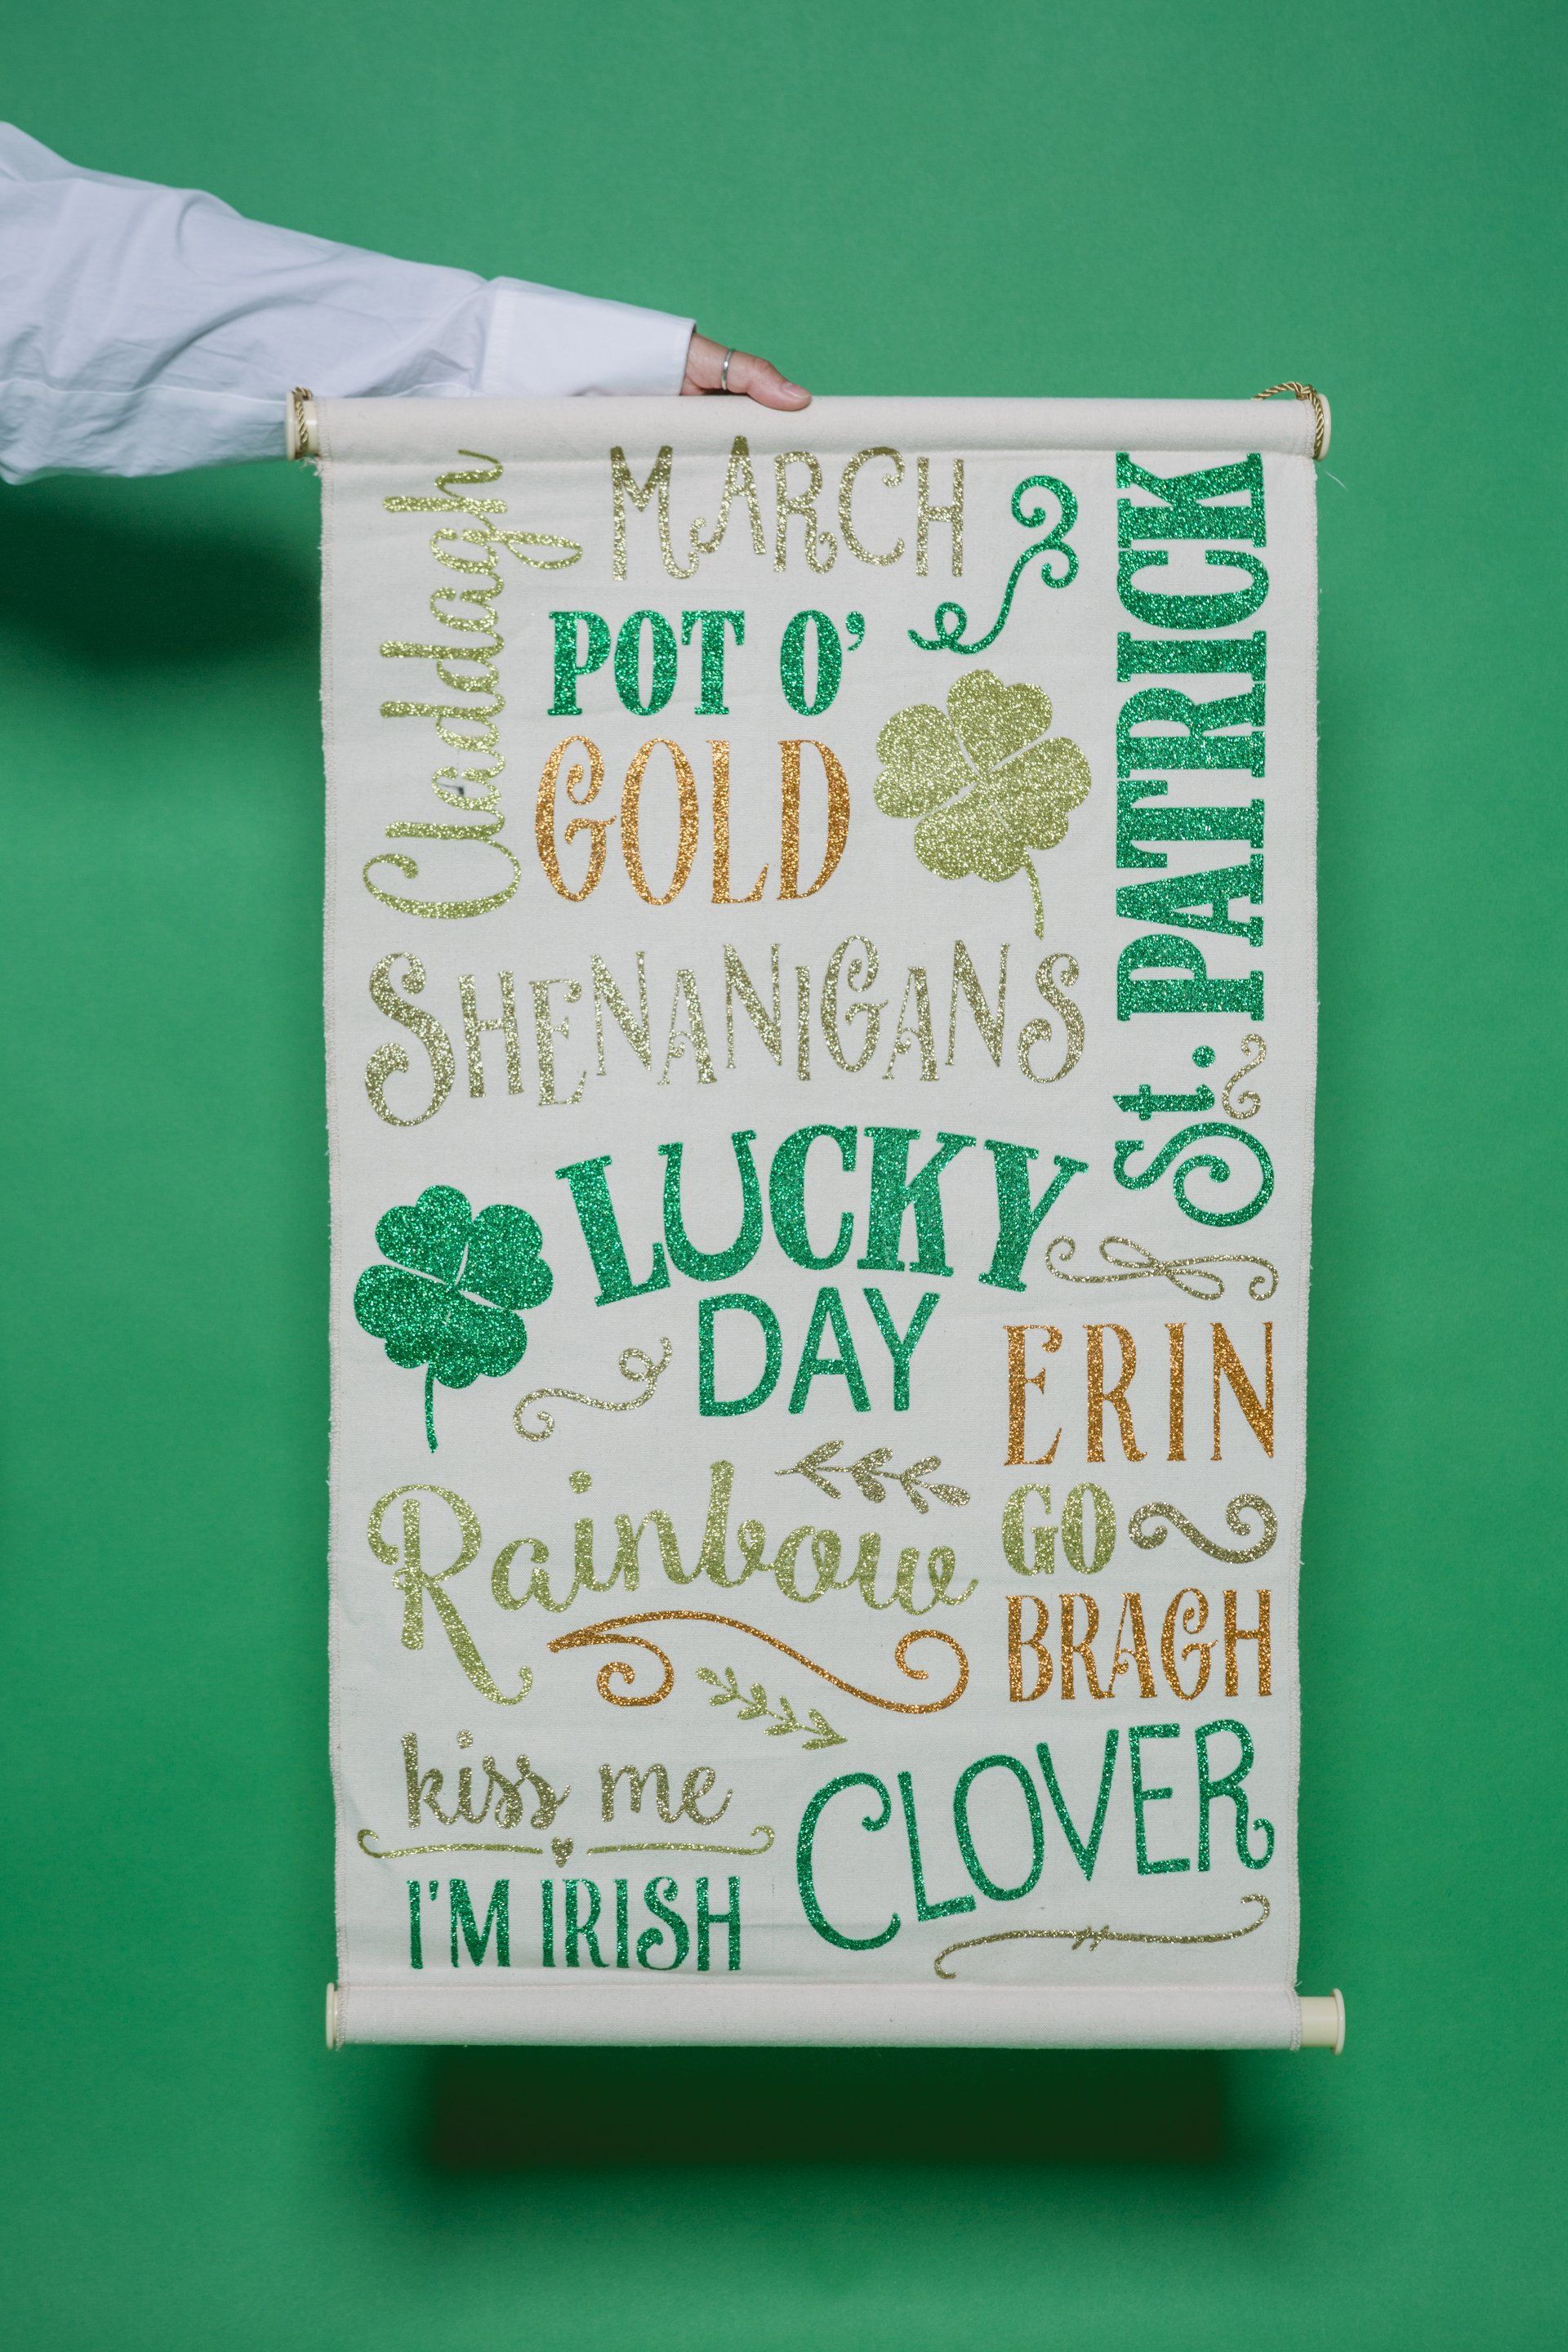 A person holding a scroll with words describing St. Patrick's Day